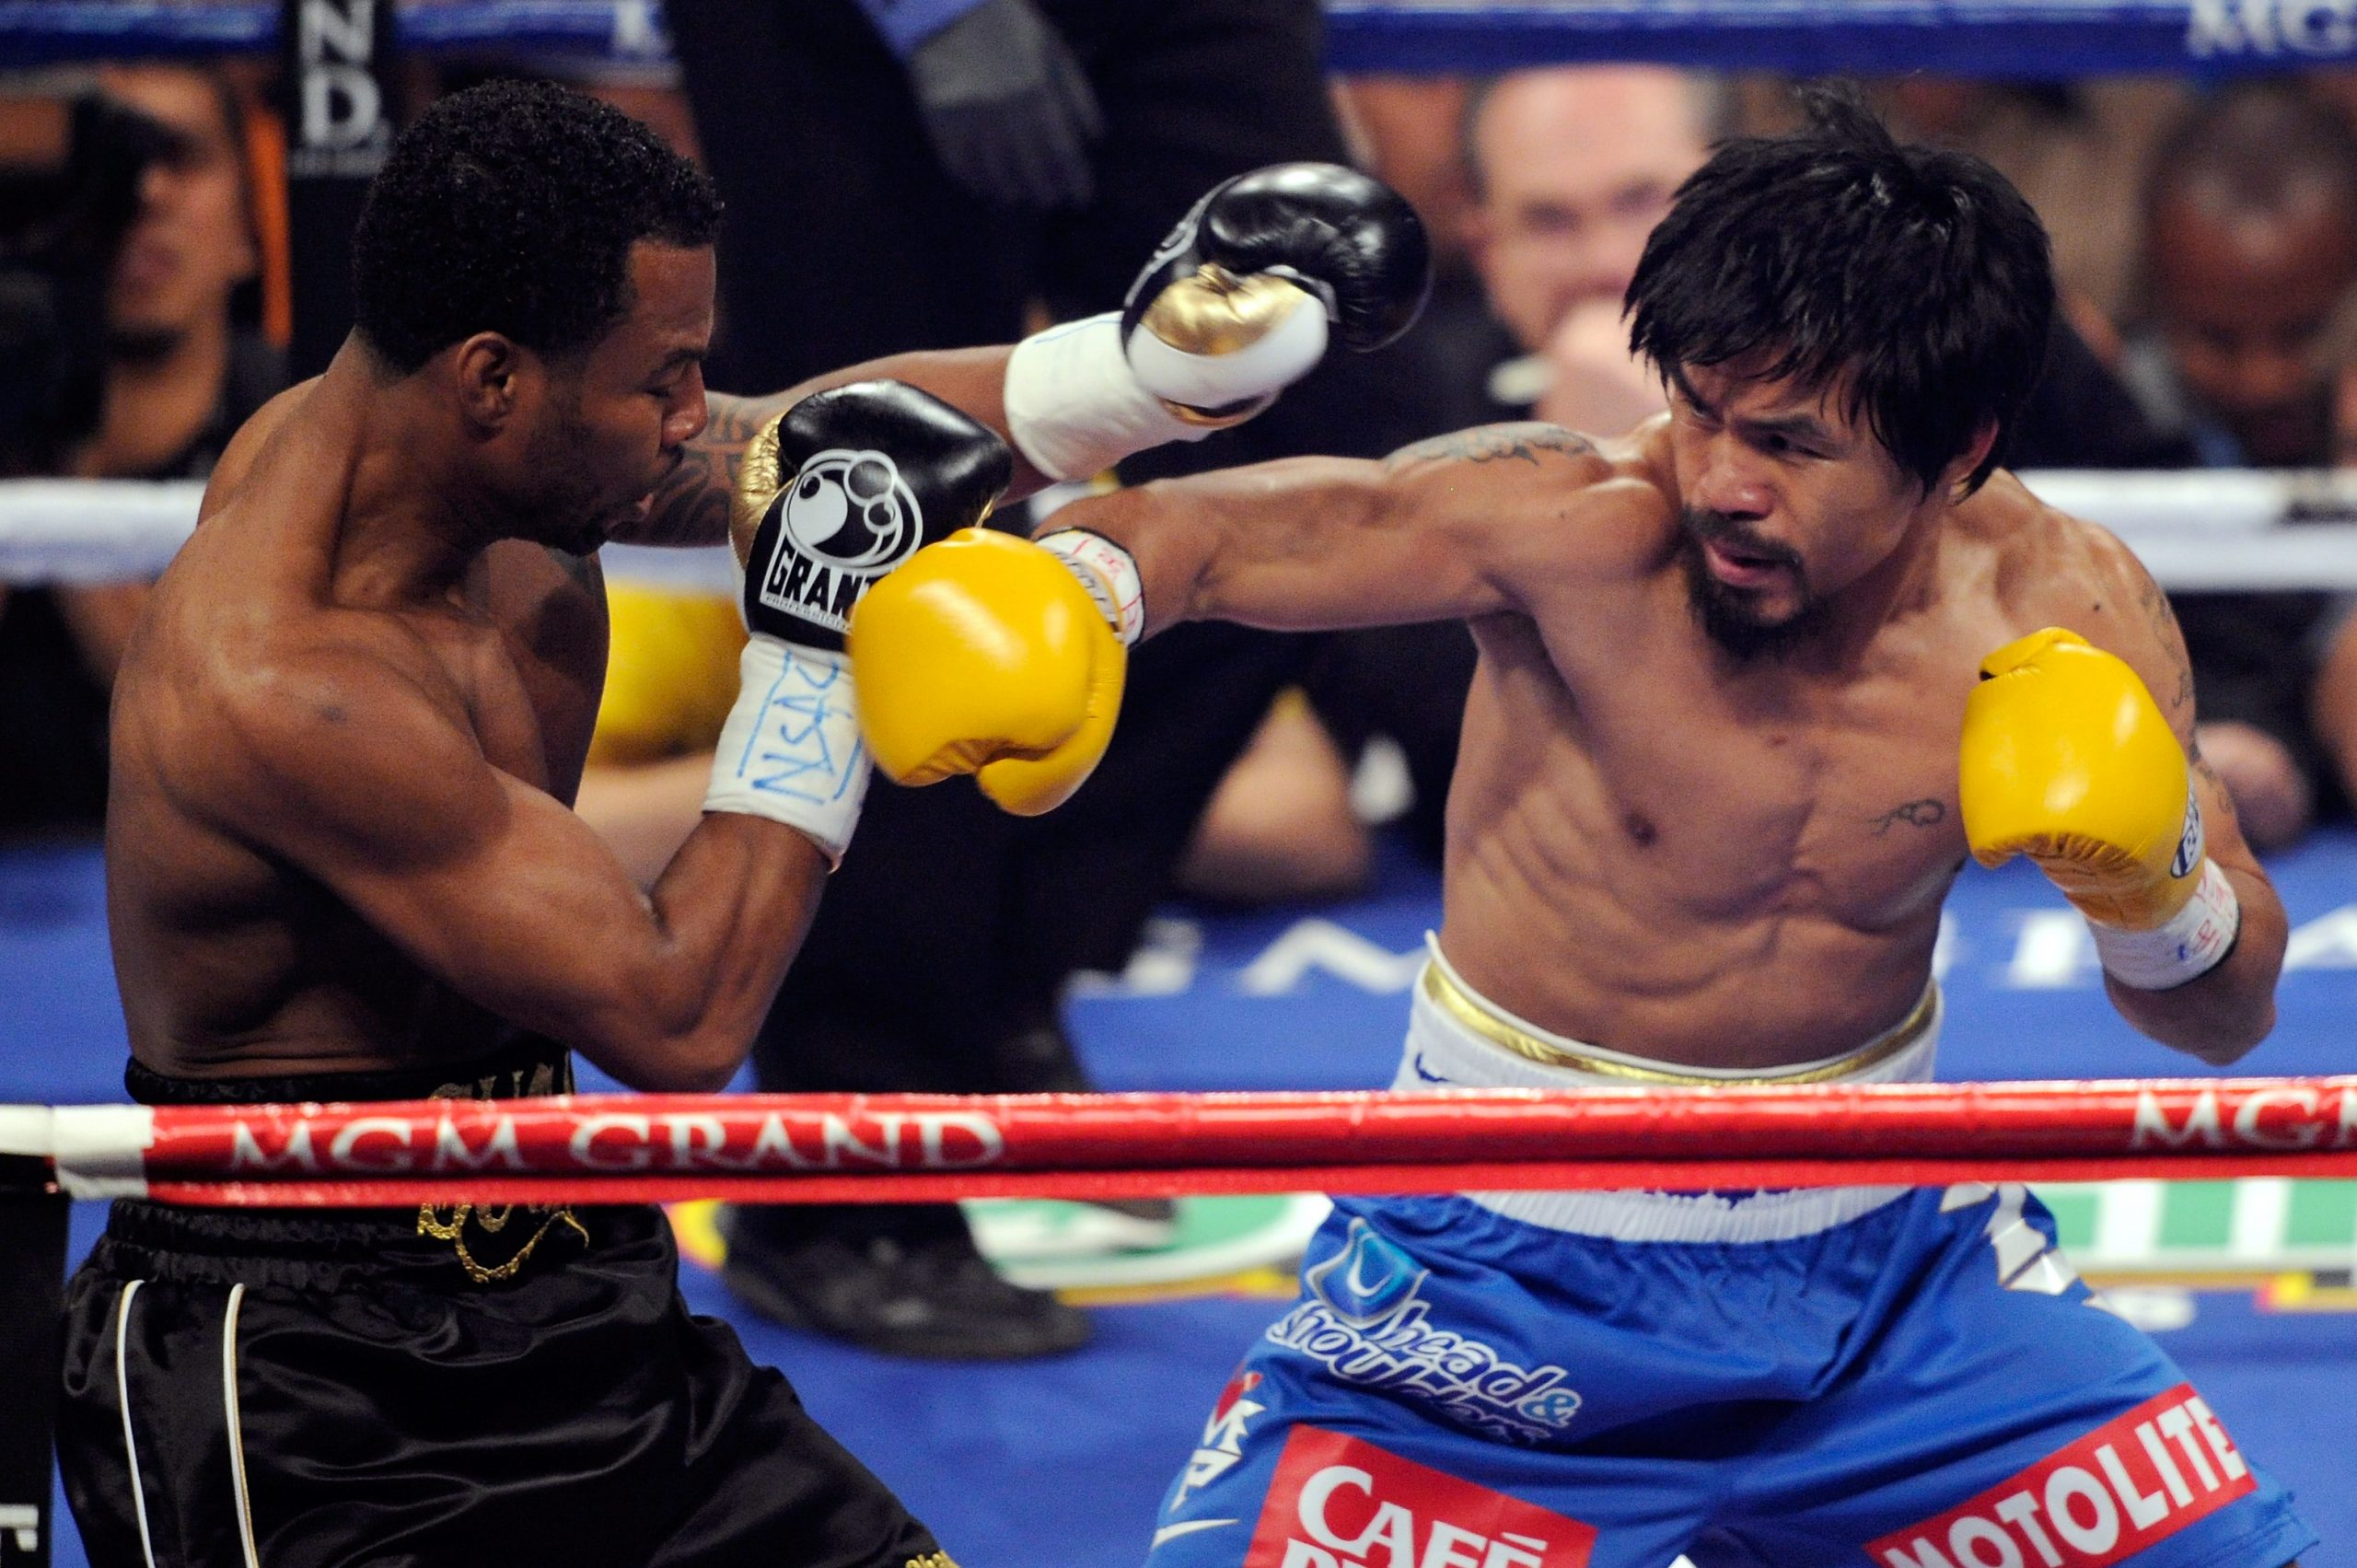 Manny Pacquiao Vs Floyd Mayweather Jr. Fight: Is Mayweather Jr. Afraid Of Losing